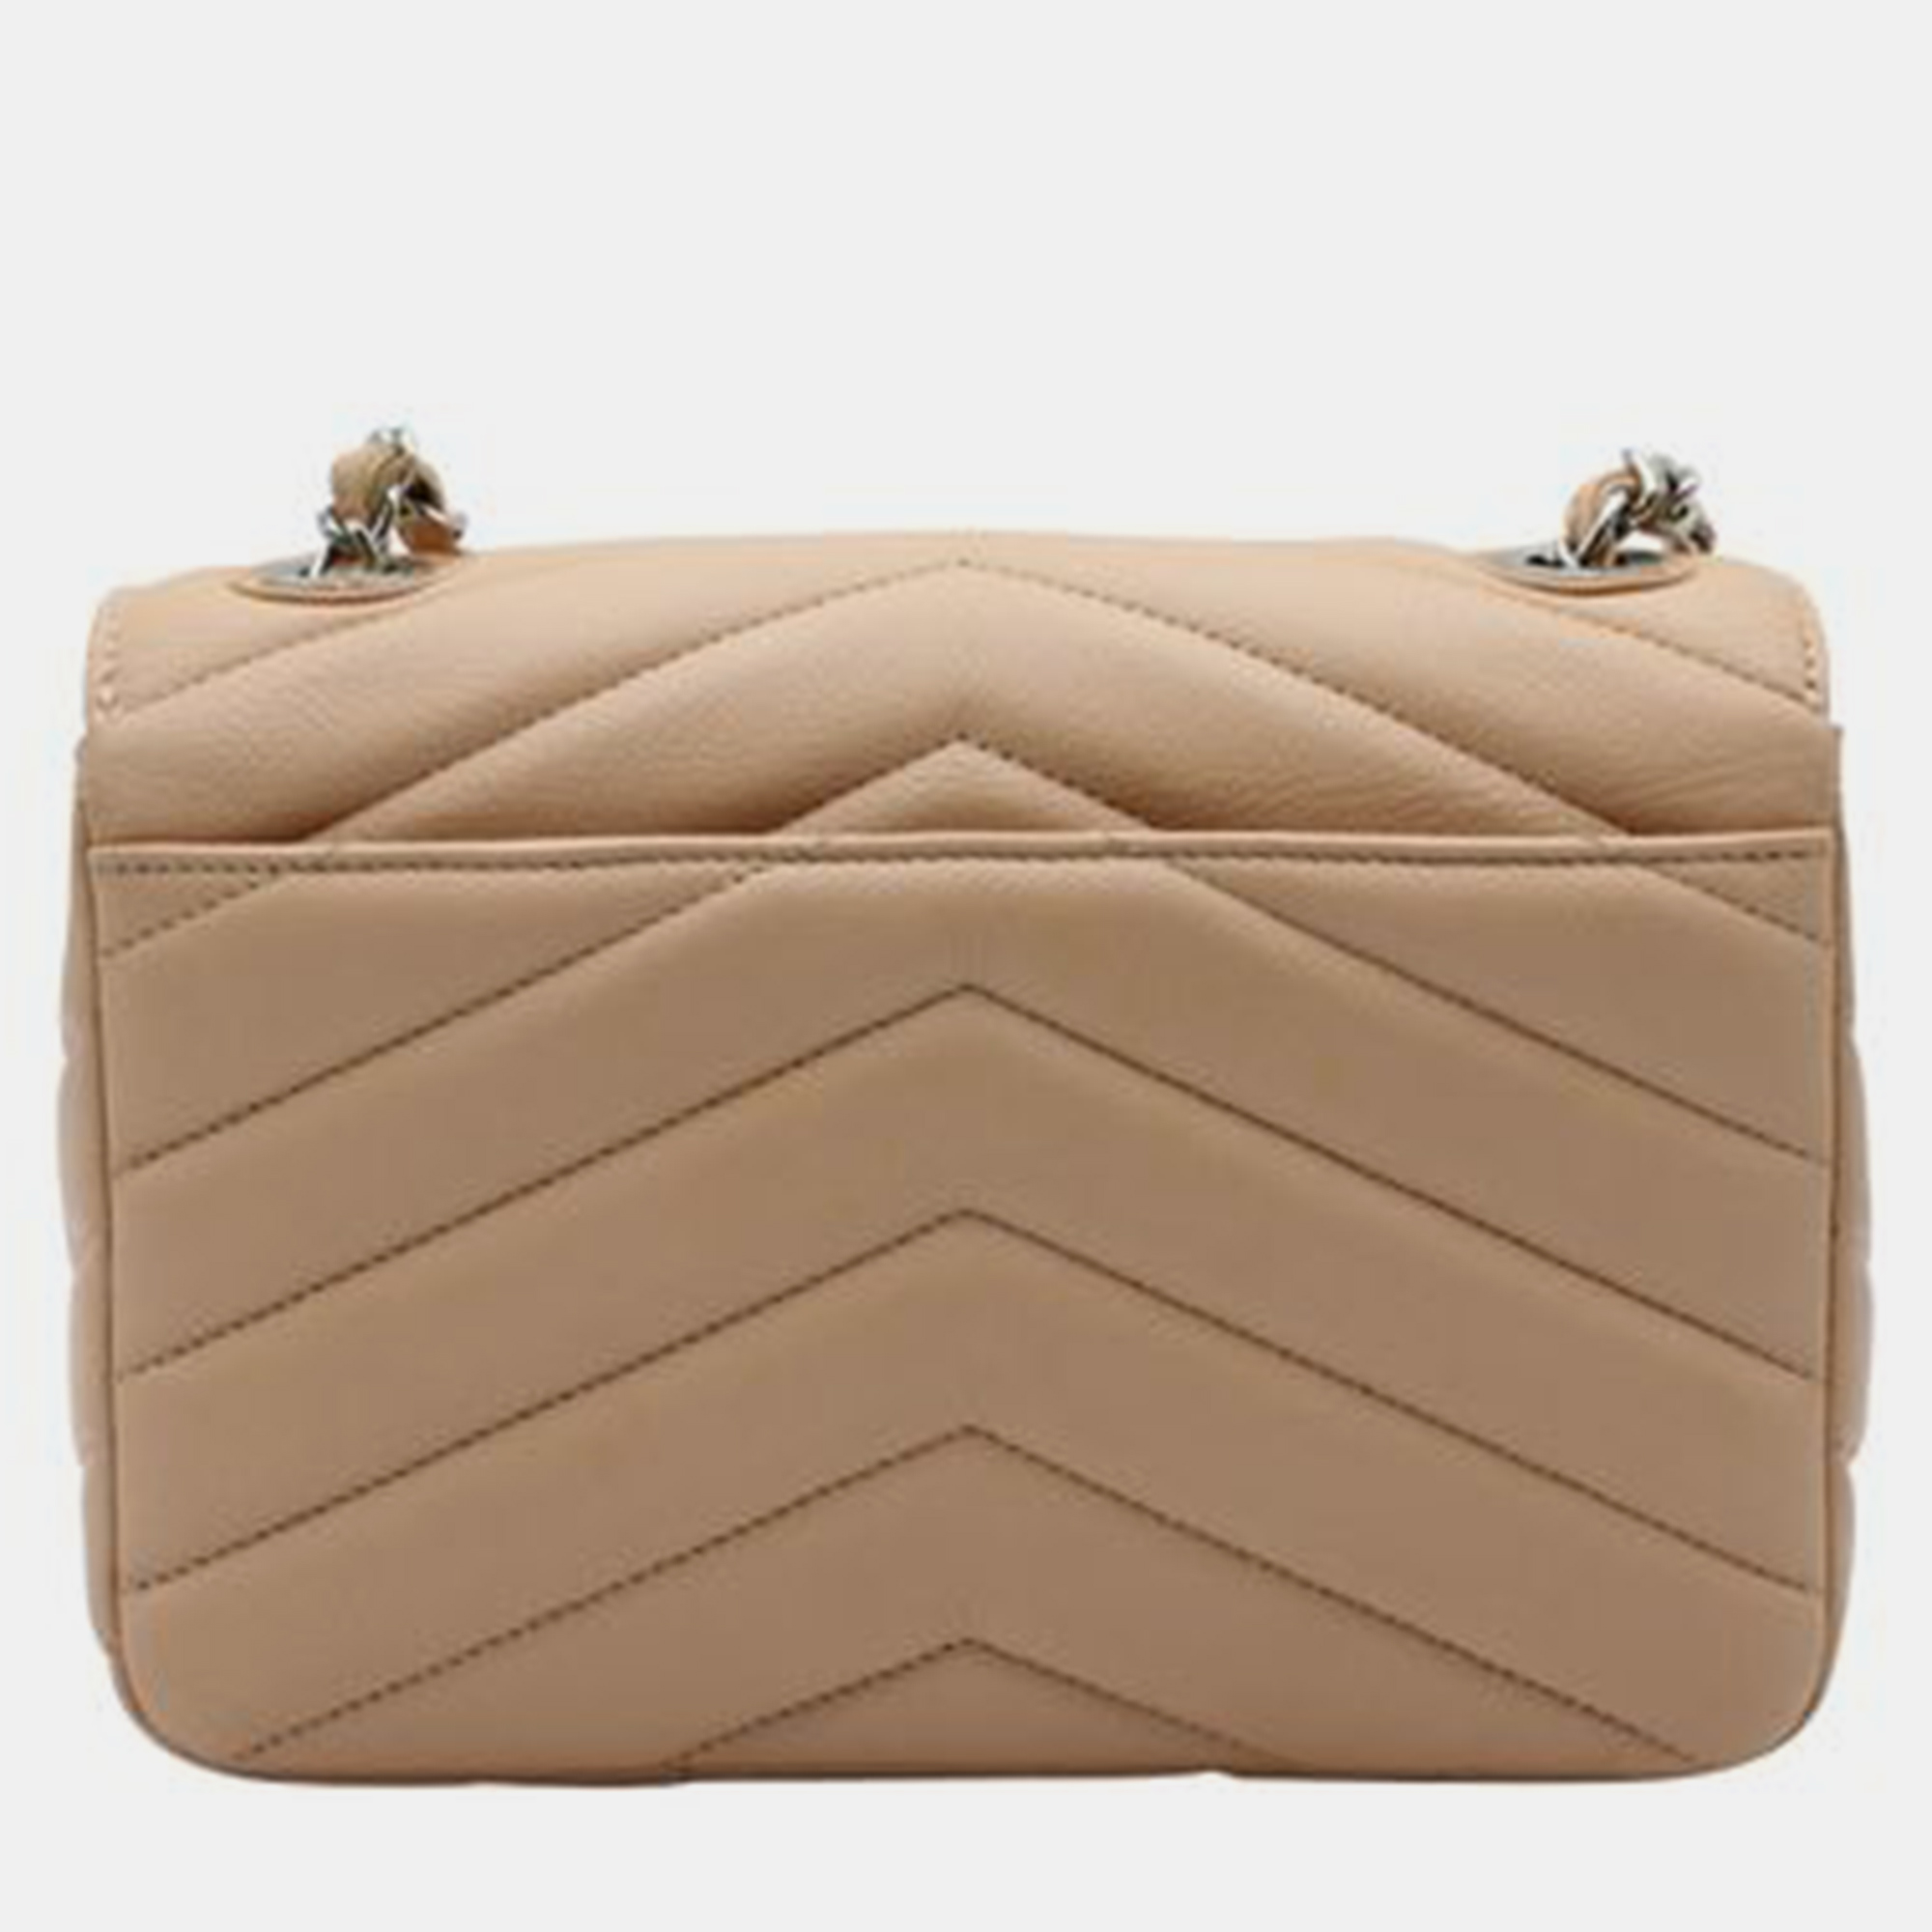 CHANEL Nude Chevron Flap Bag In Silver Hardware SHOULDER BAGS